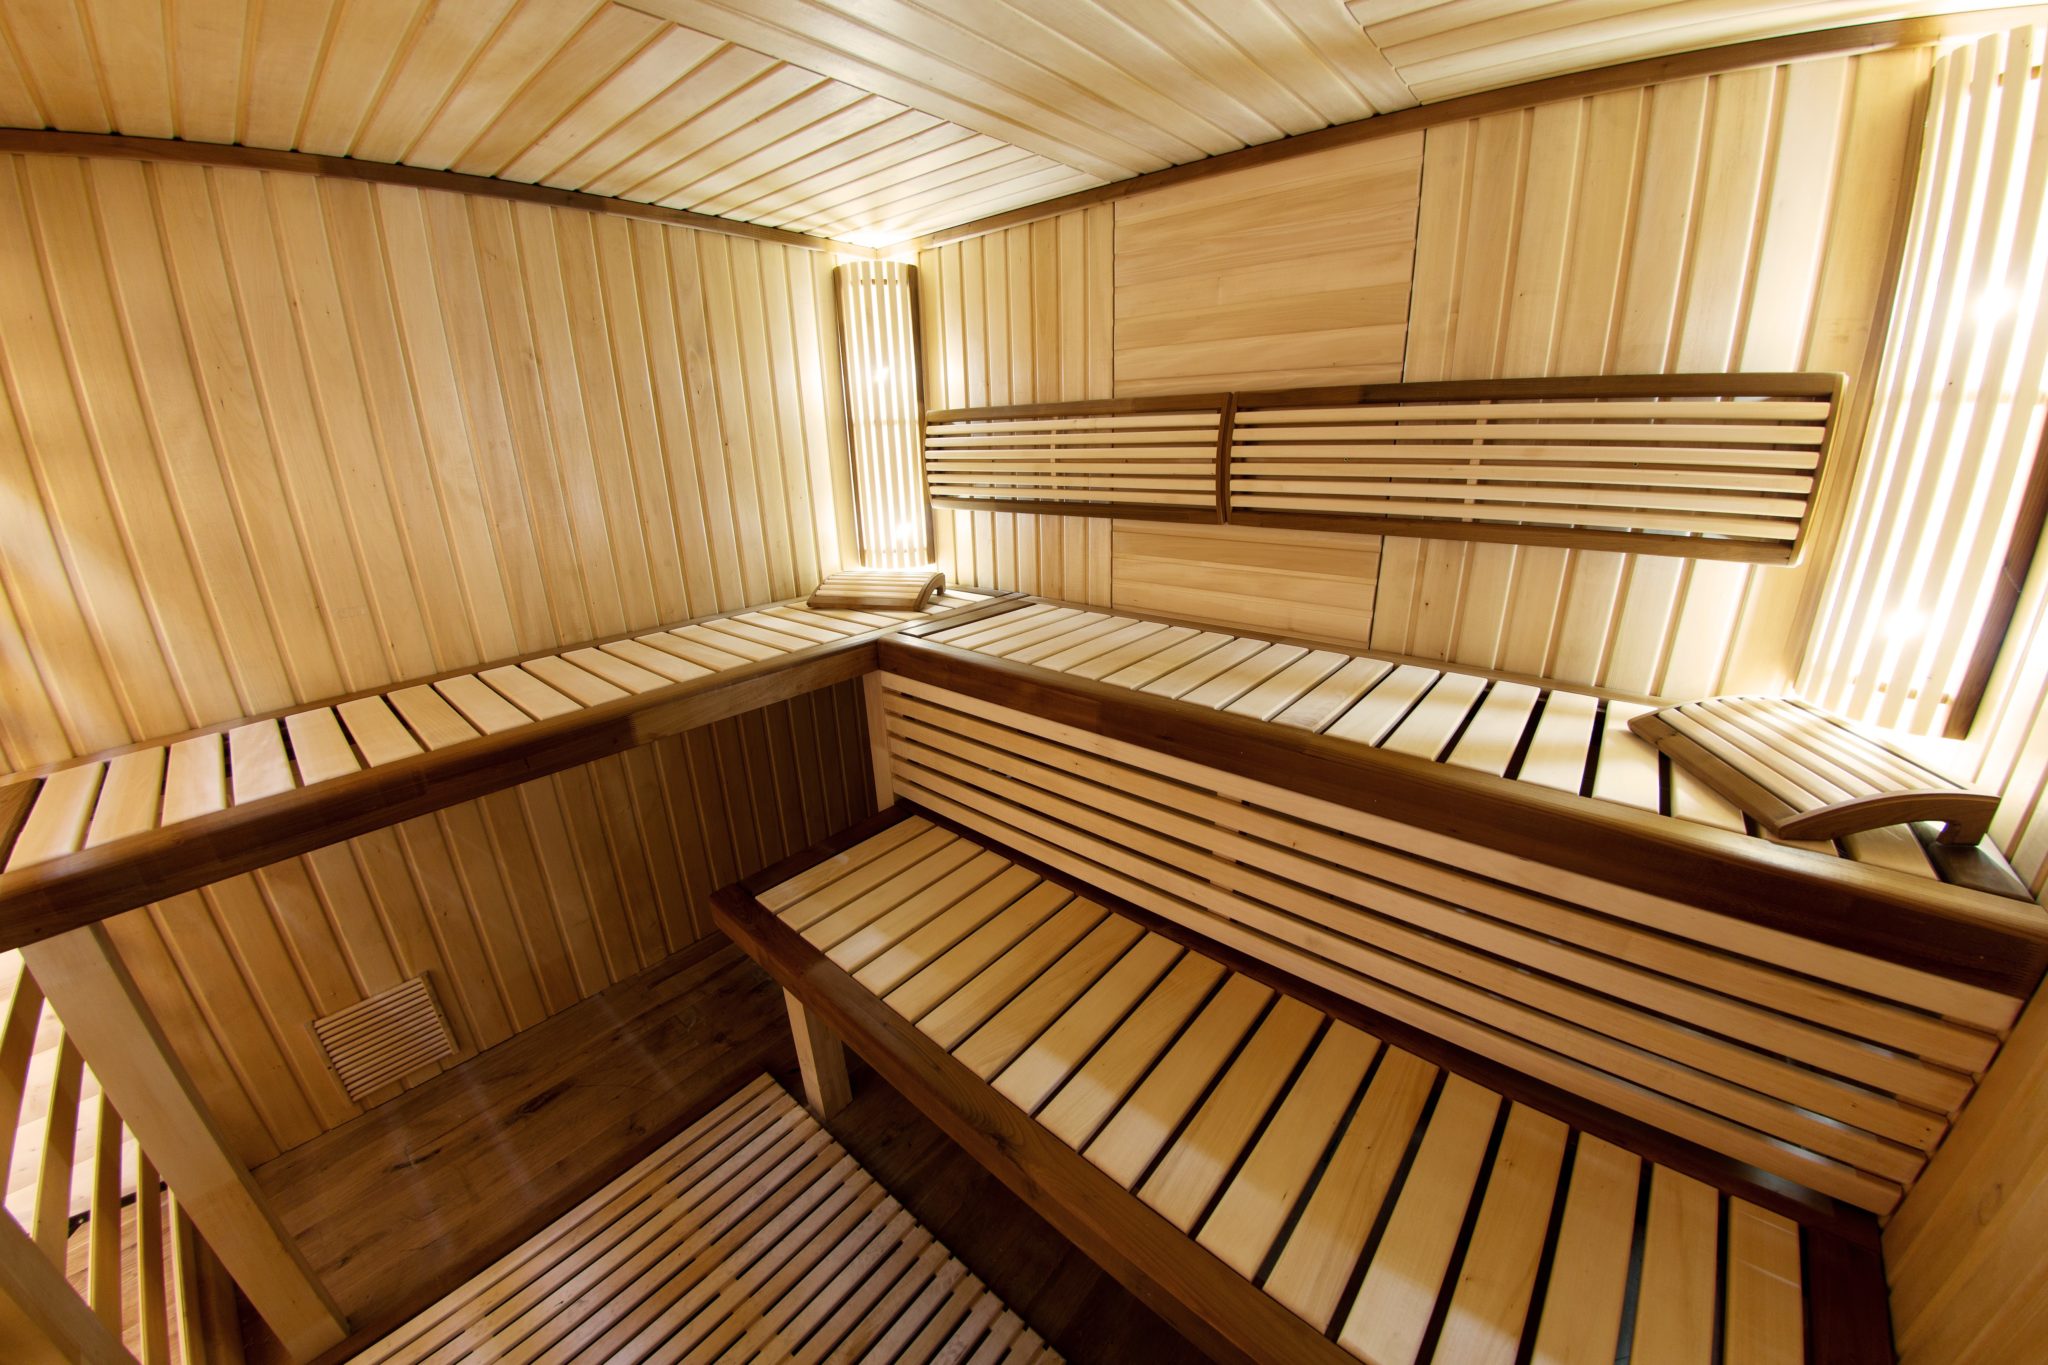 Will gay saunas be able to open after lockdown?